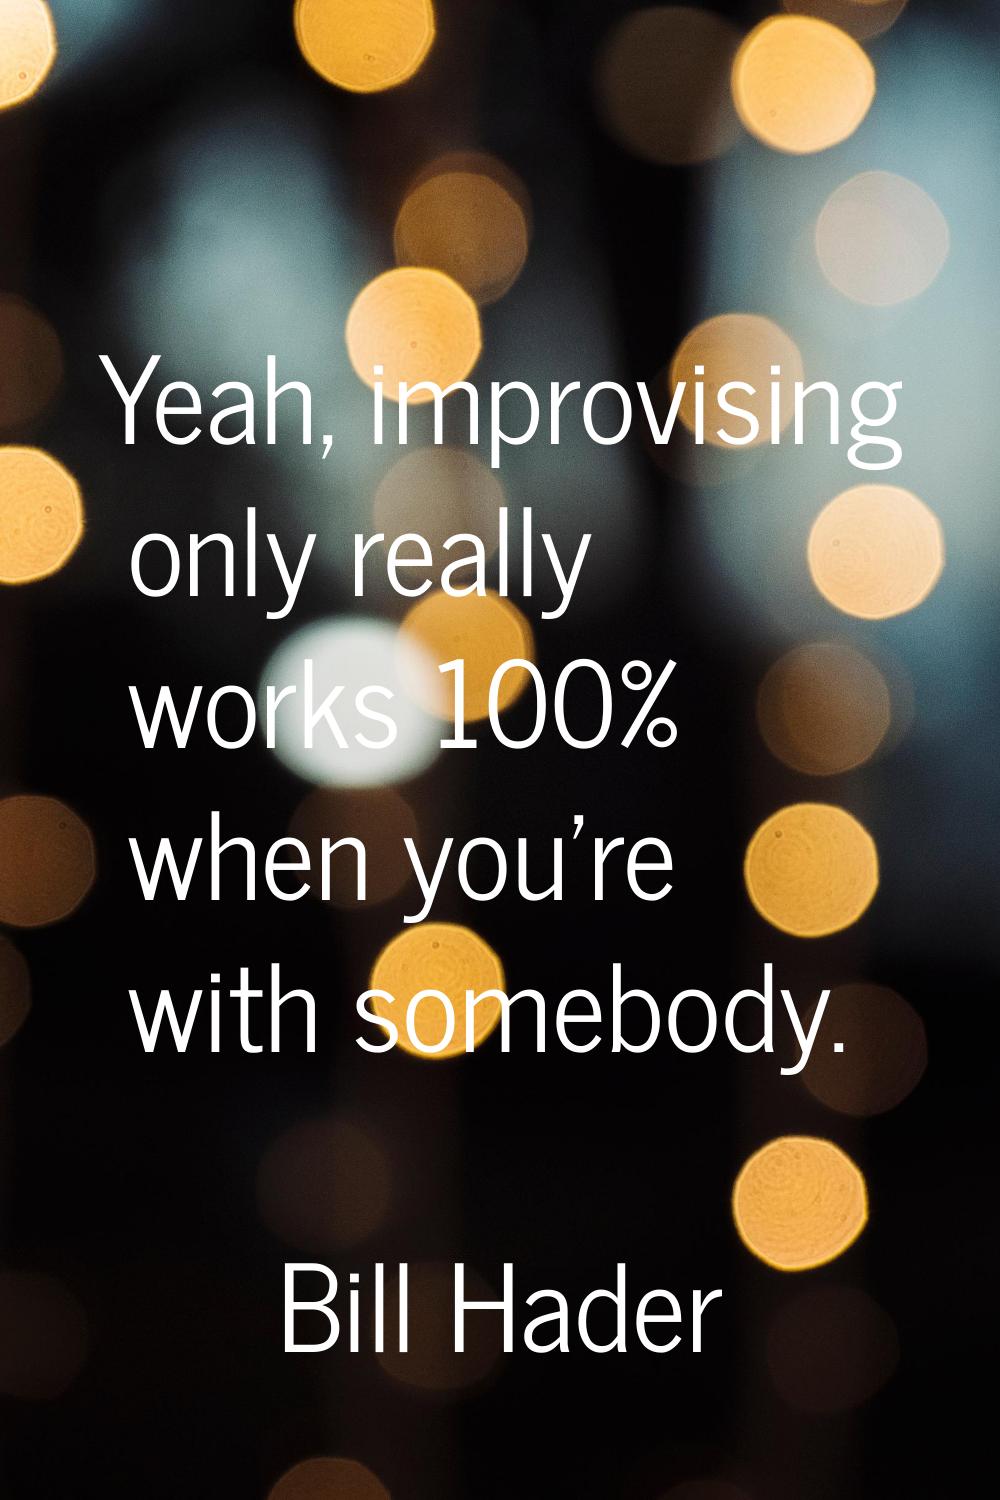 Yeah, improvising only really works 100% when you're with somebody.